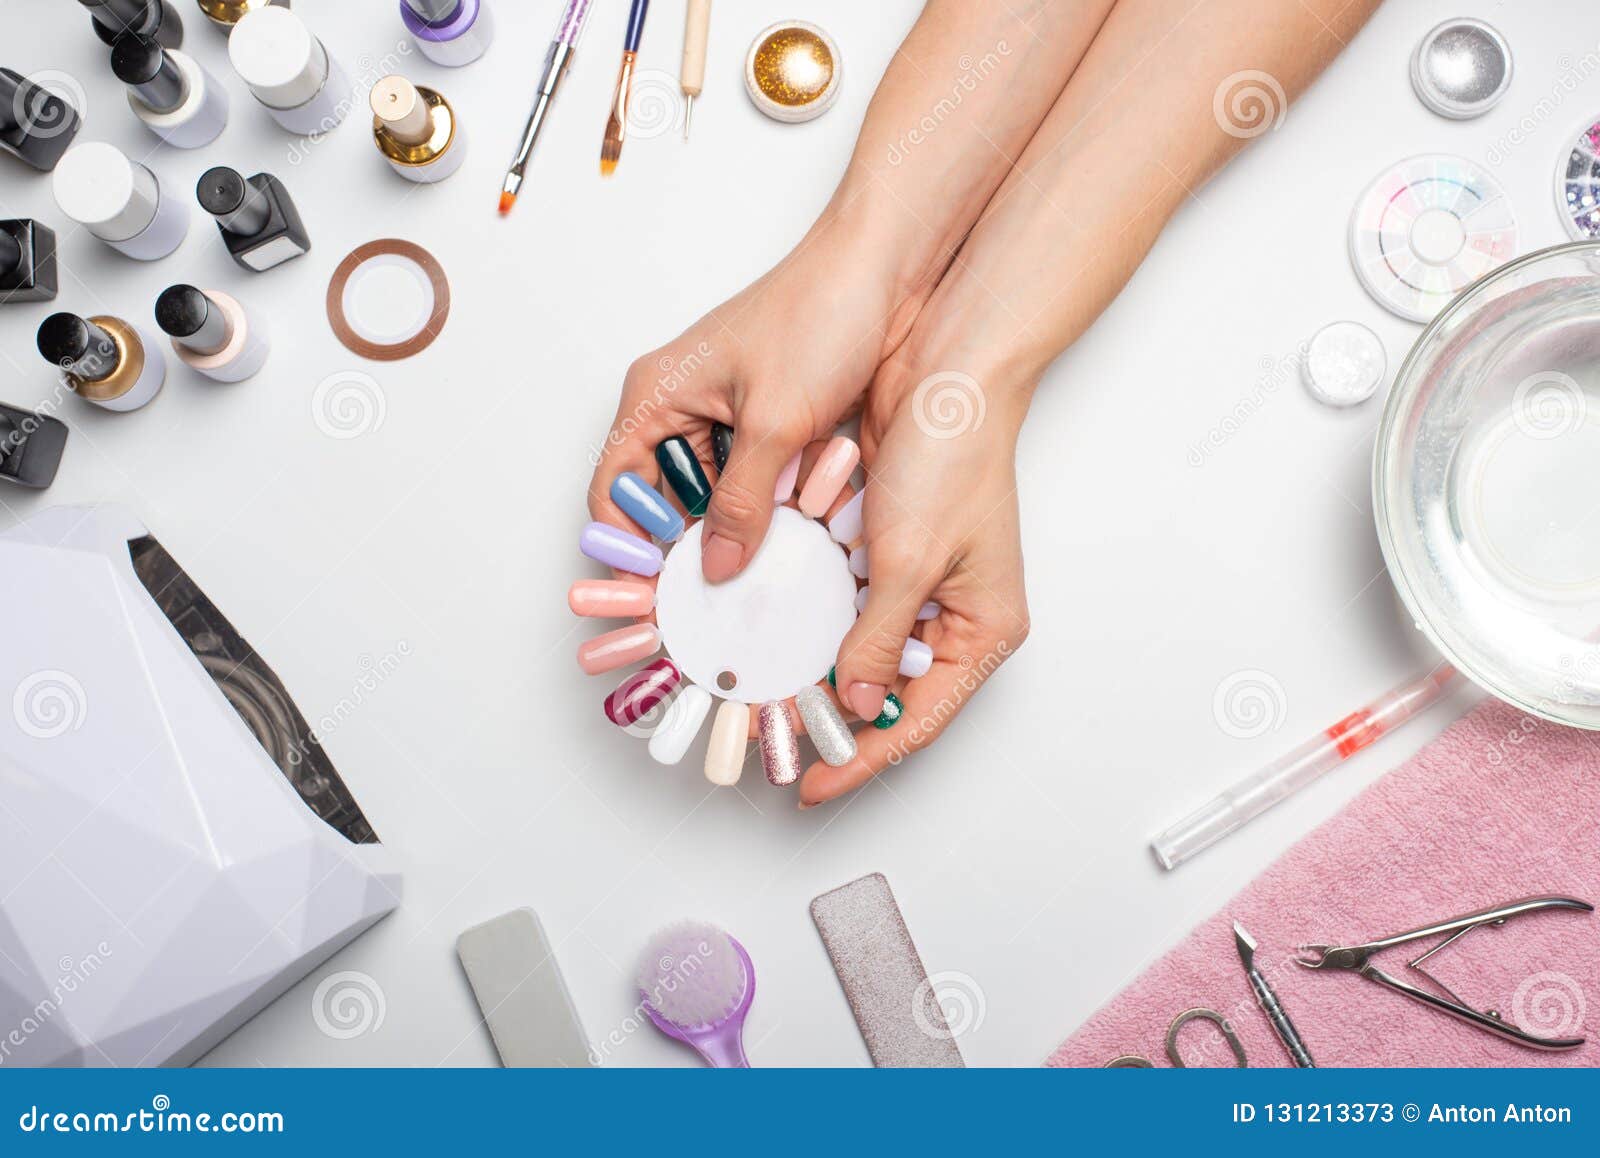 manicure - the girl herself does, watching the nails with the help of a tool on a white background. concept of beauty salons and n